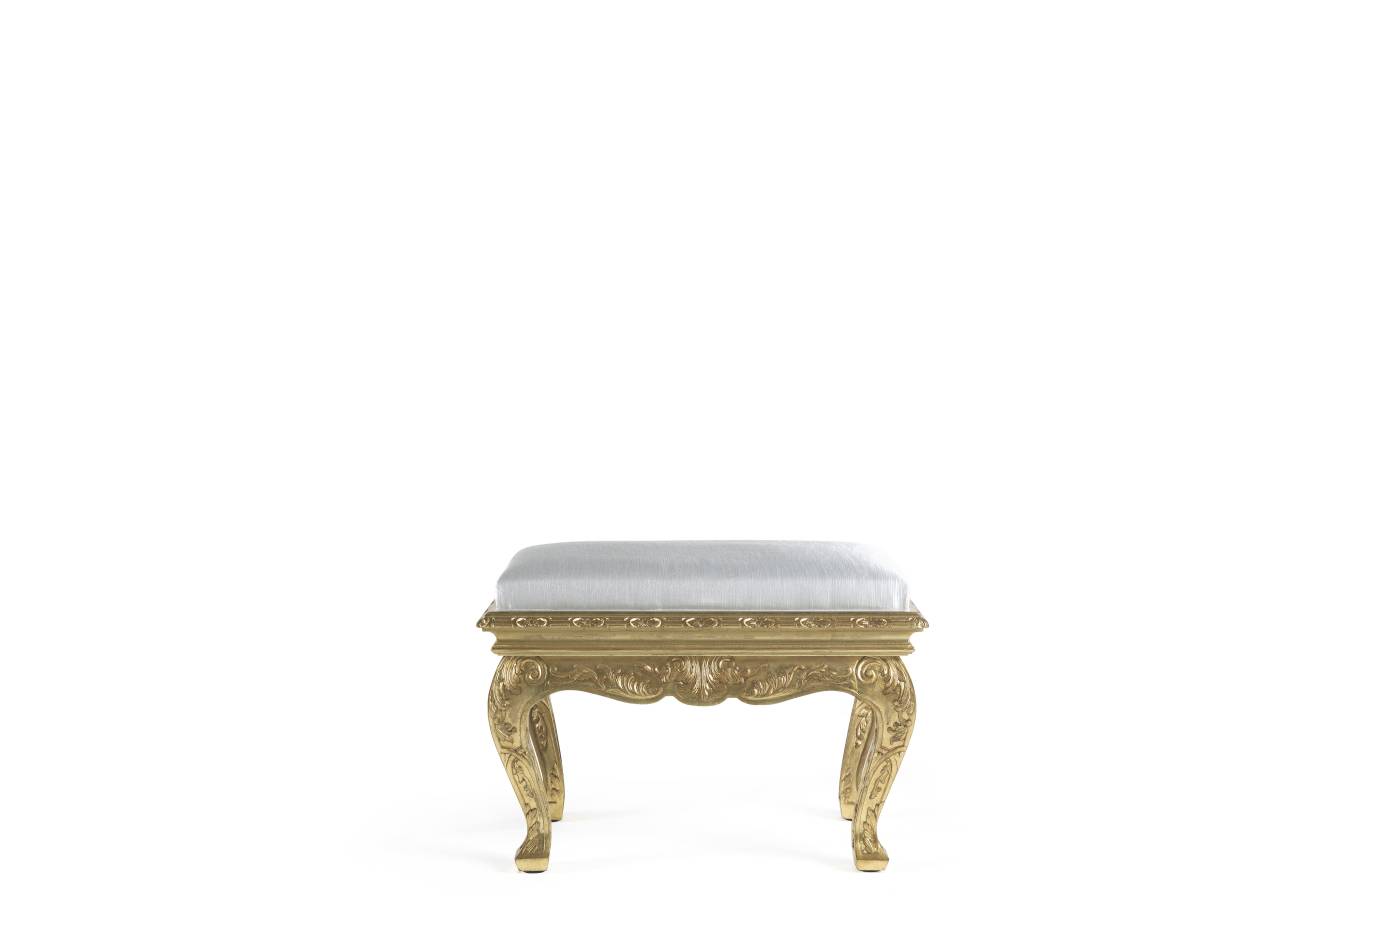 FRAGONARD pouf - Bespoke projects with luxury Made in Italy classic furniture